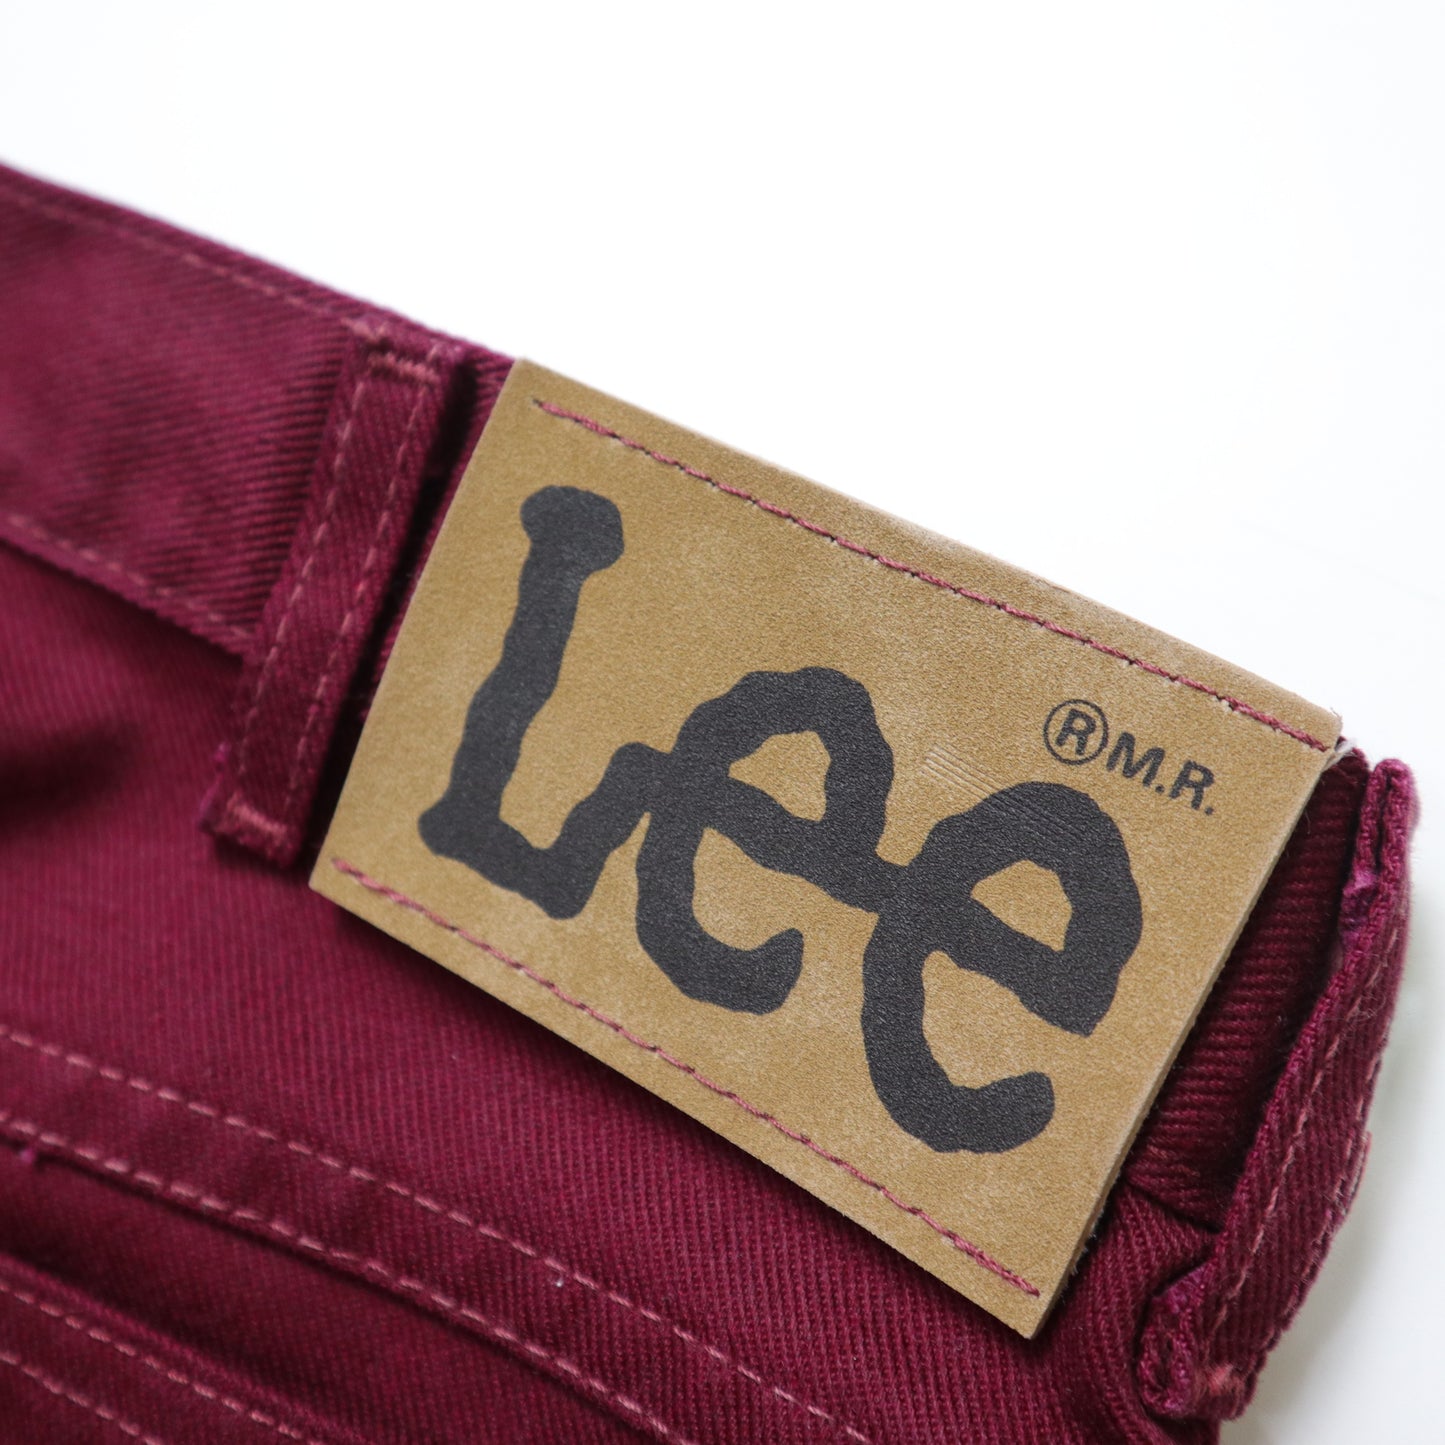 (32W)70-80s Lee Riders USA-made burgundy trousers